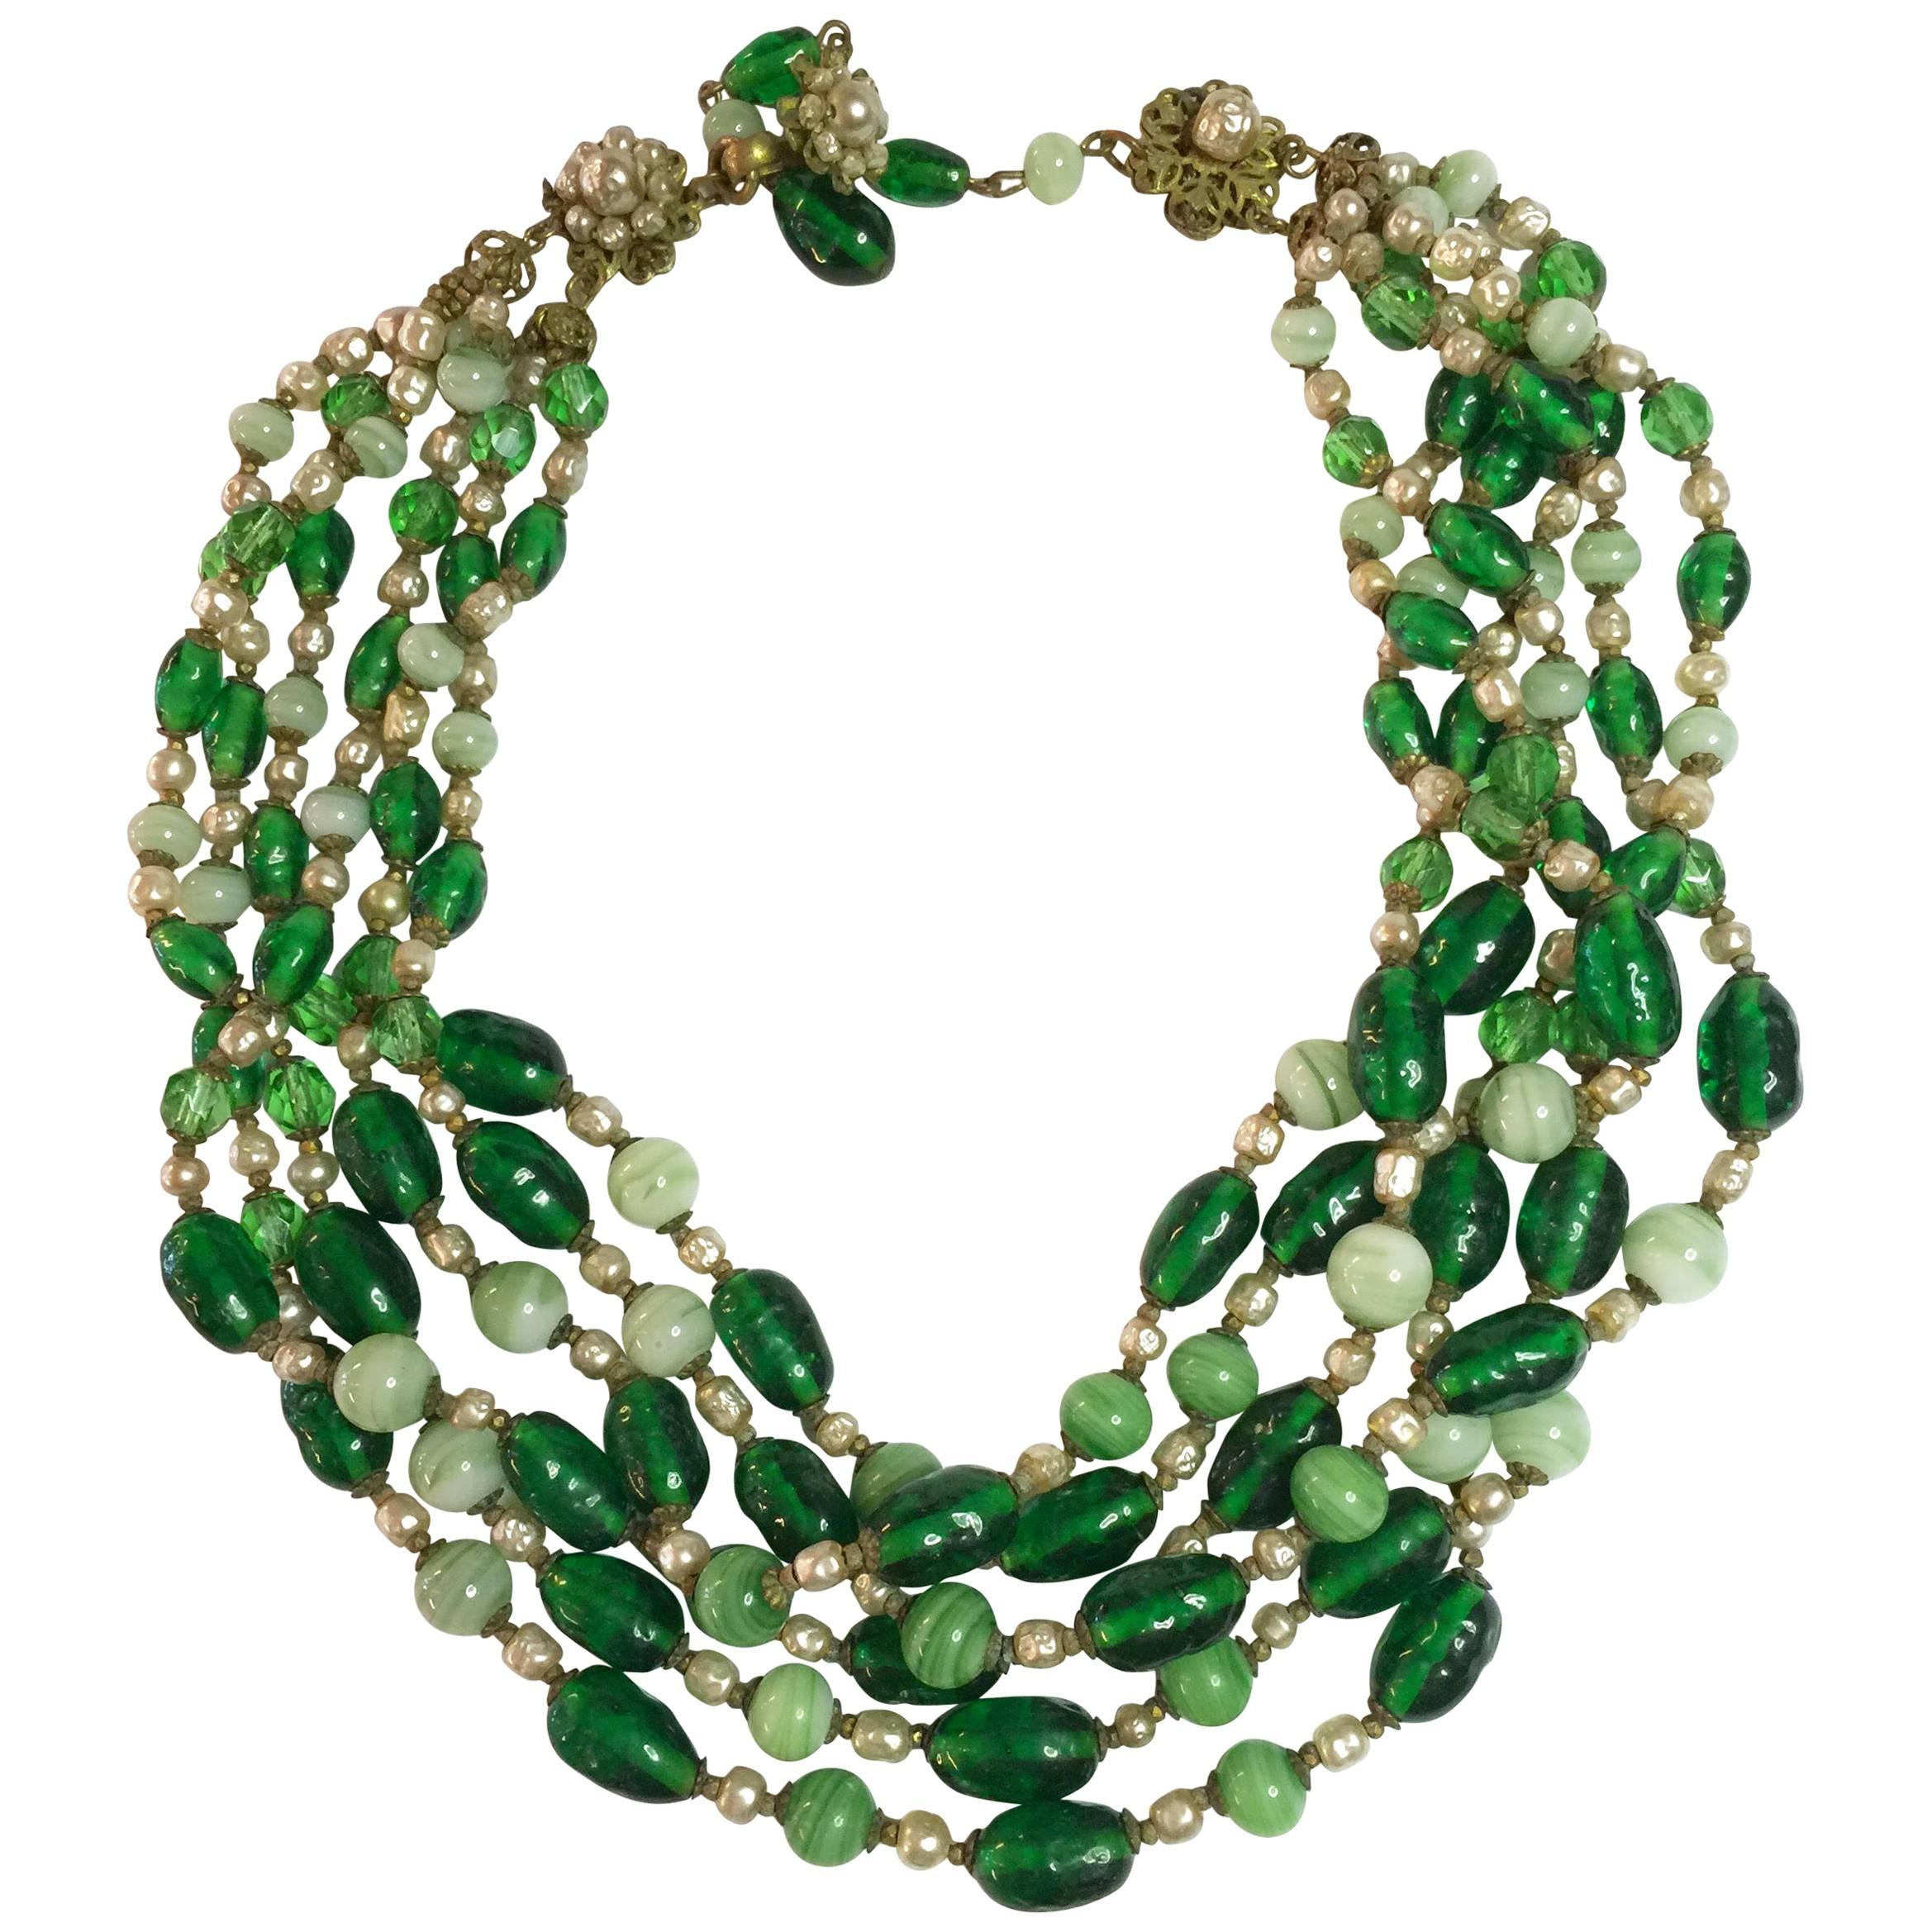 MIRIAM HASKELL Multistrand Faux Emerald Baroque Pearl Necklace